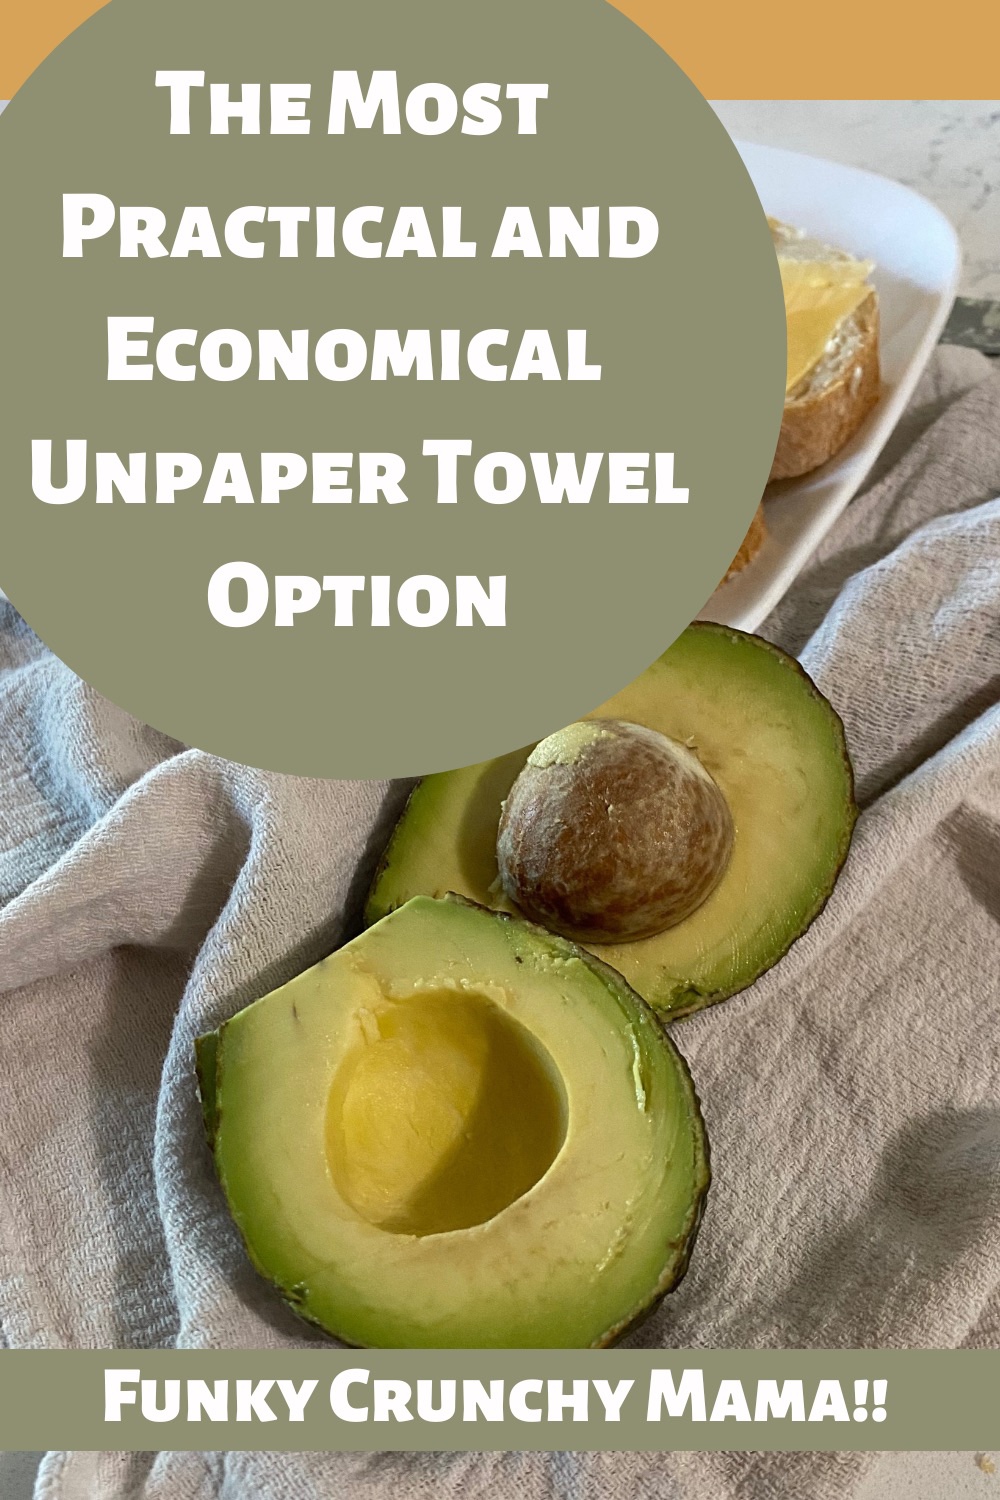 Pinterest image for article titled "The Most Practical and Economical Unpaper Towel Option" by Funky Crunchy Mama. Image include a cut avocado on white towel.